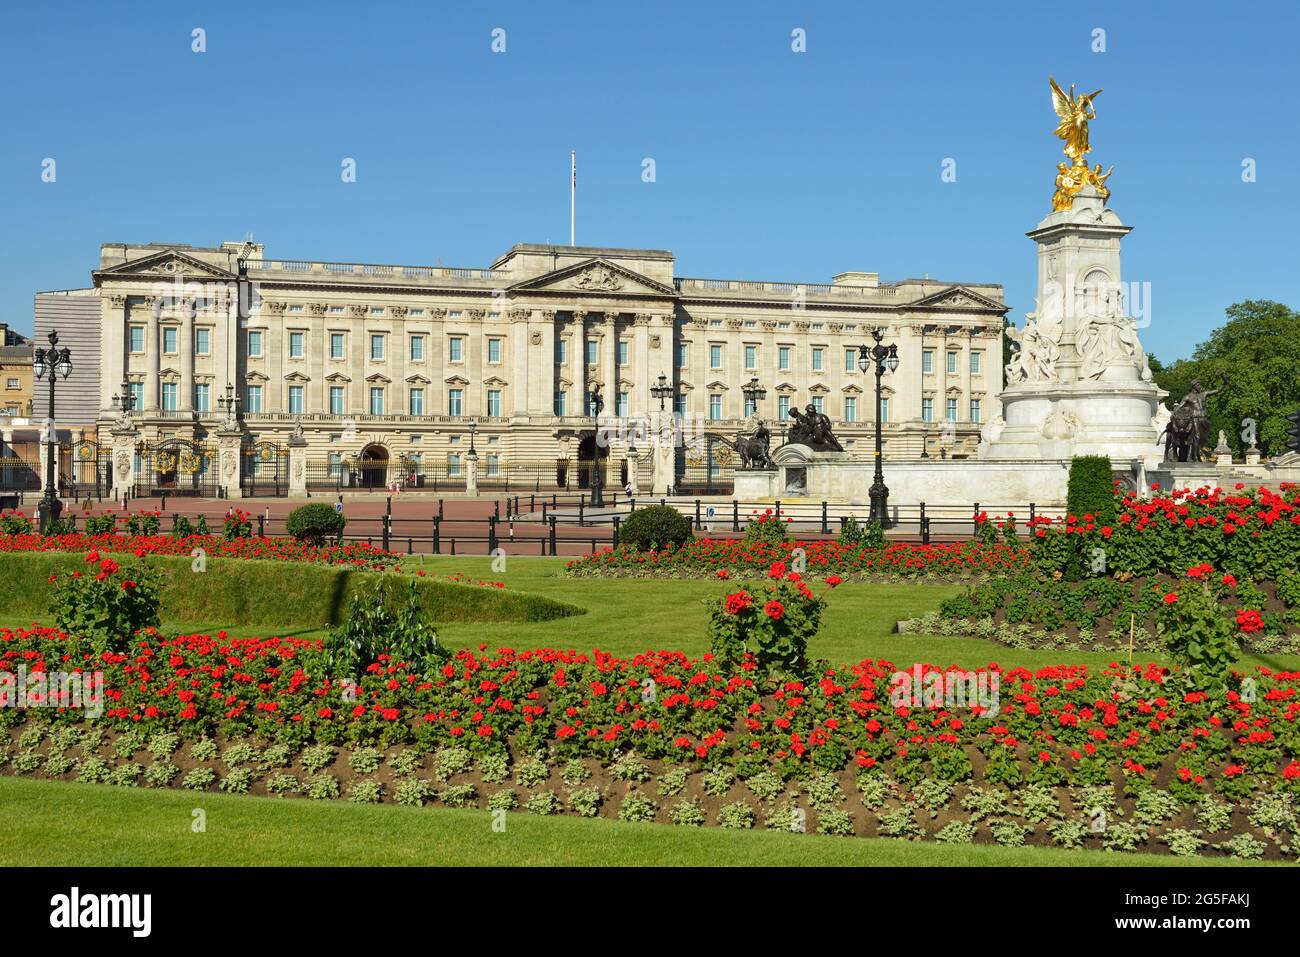 Buckingham Palace, Victoria Memorial and the Memorial Gardens, The Mall, Westminster, London, Großbritannien Stockfoto